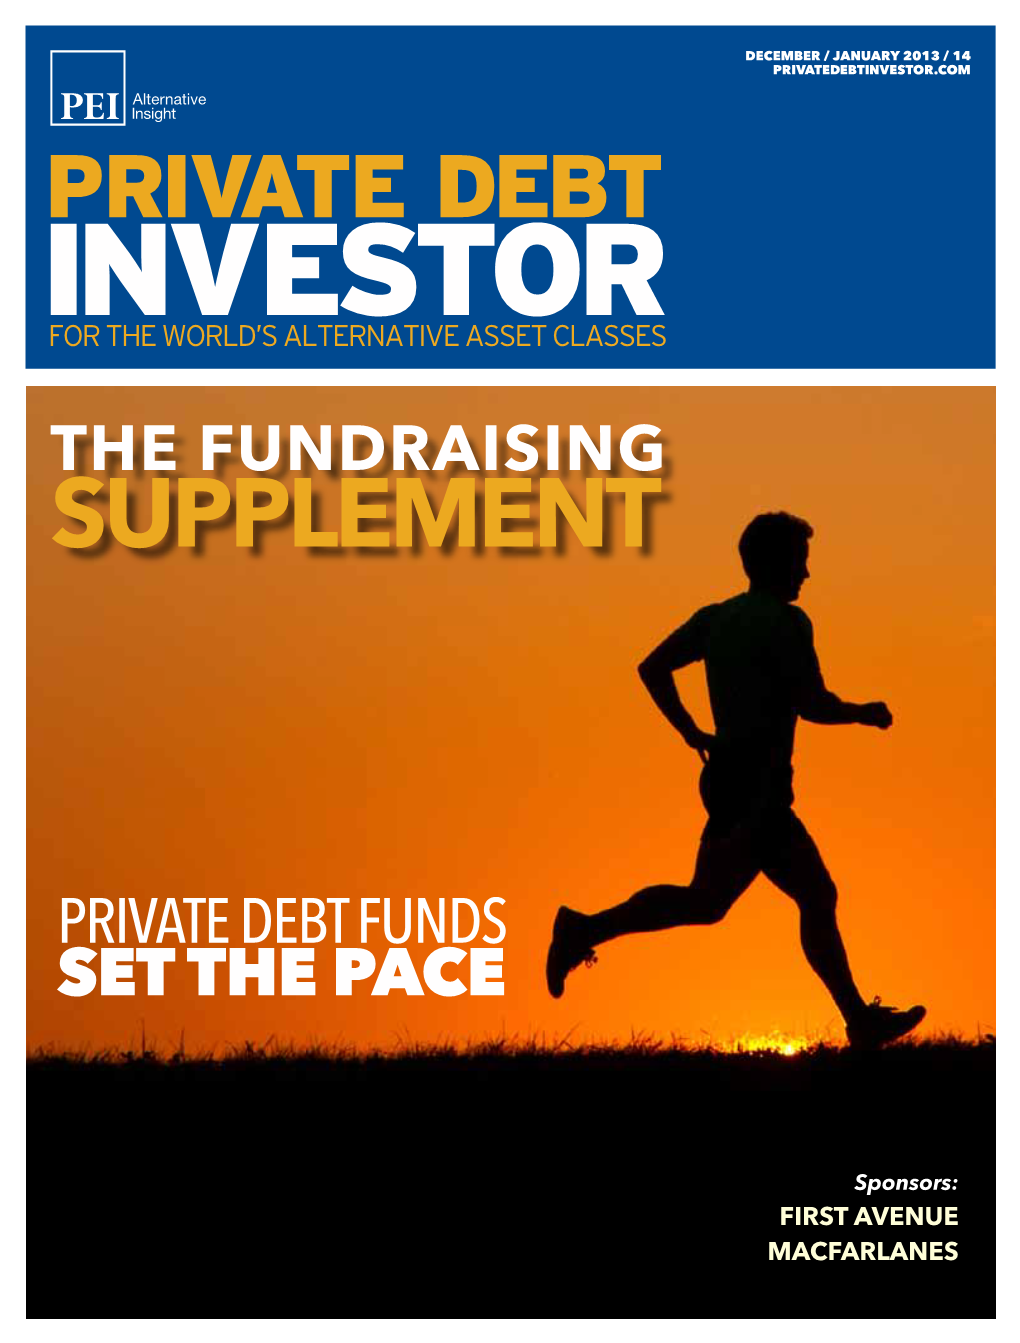 The Fundraising Supplement